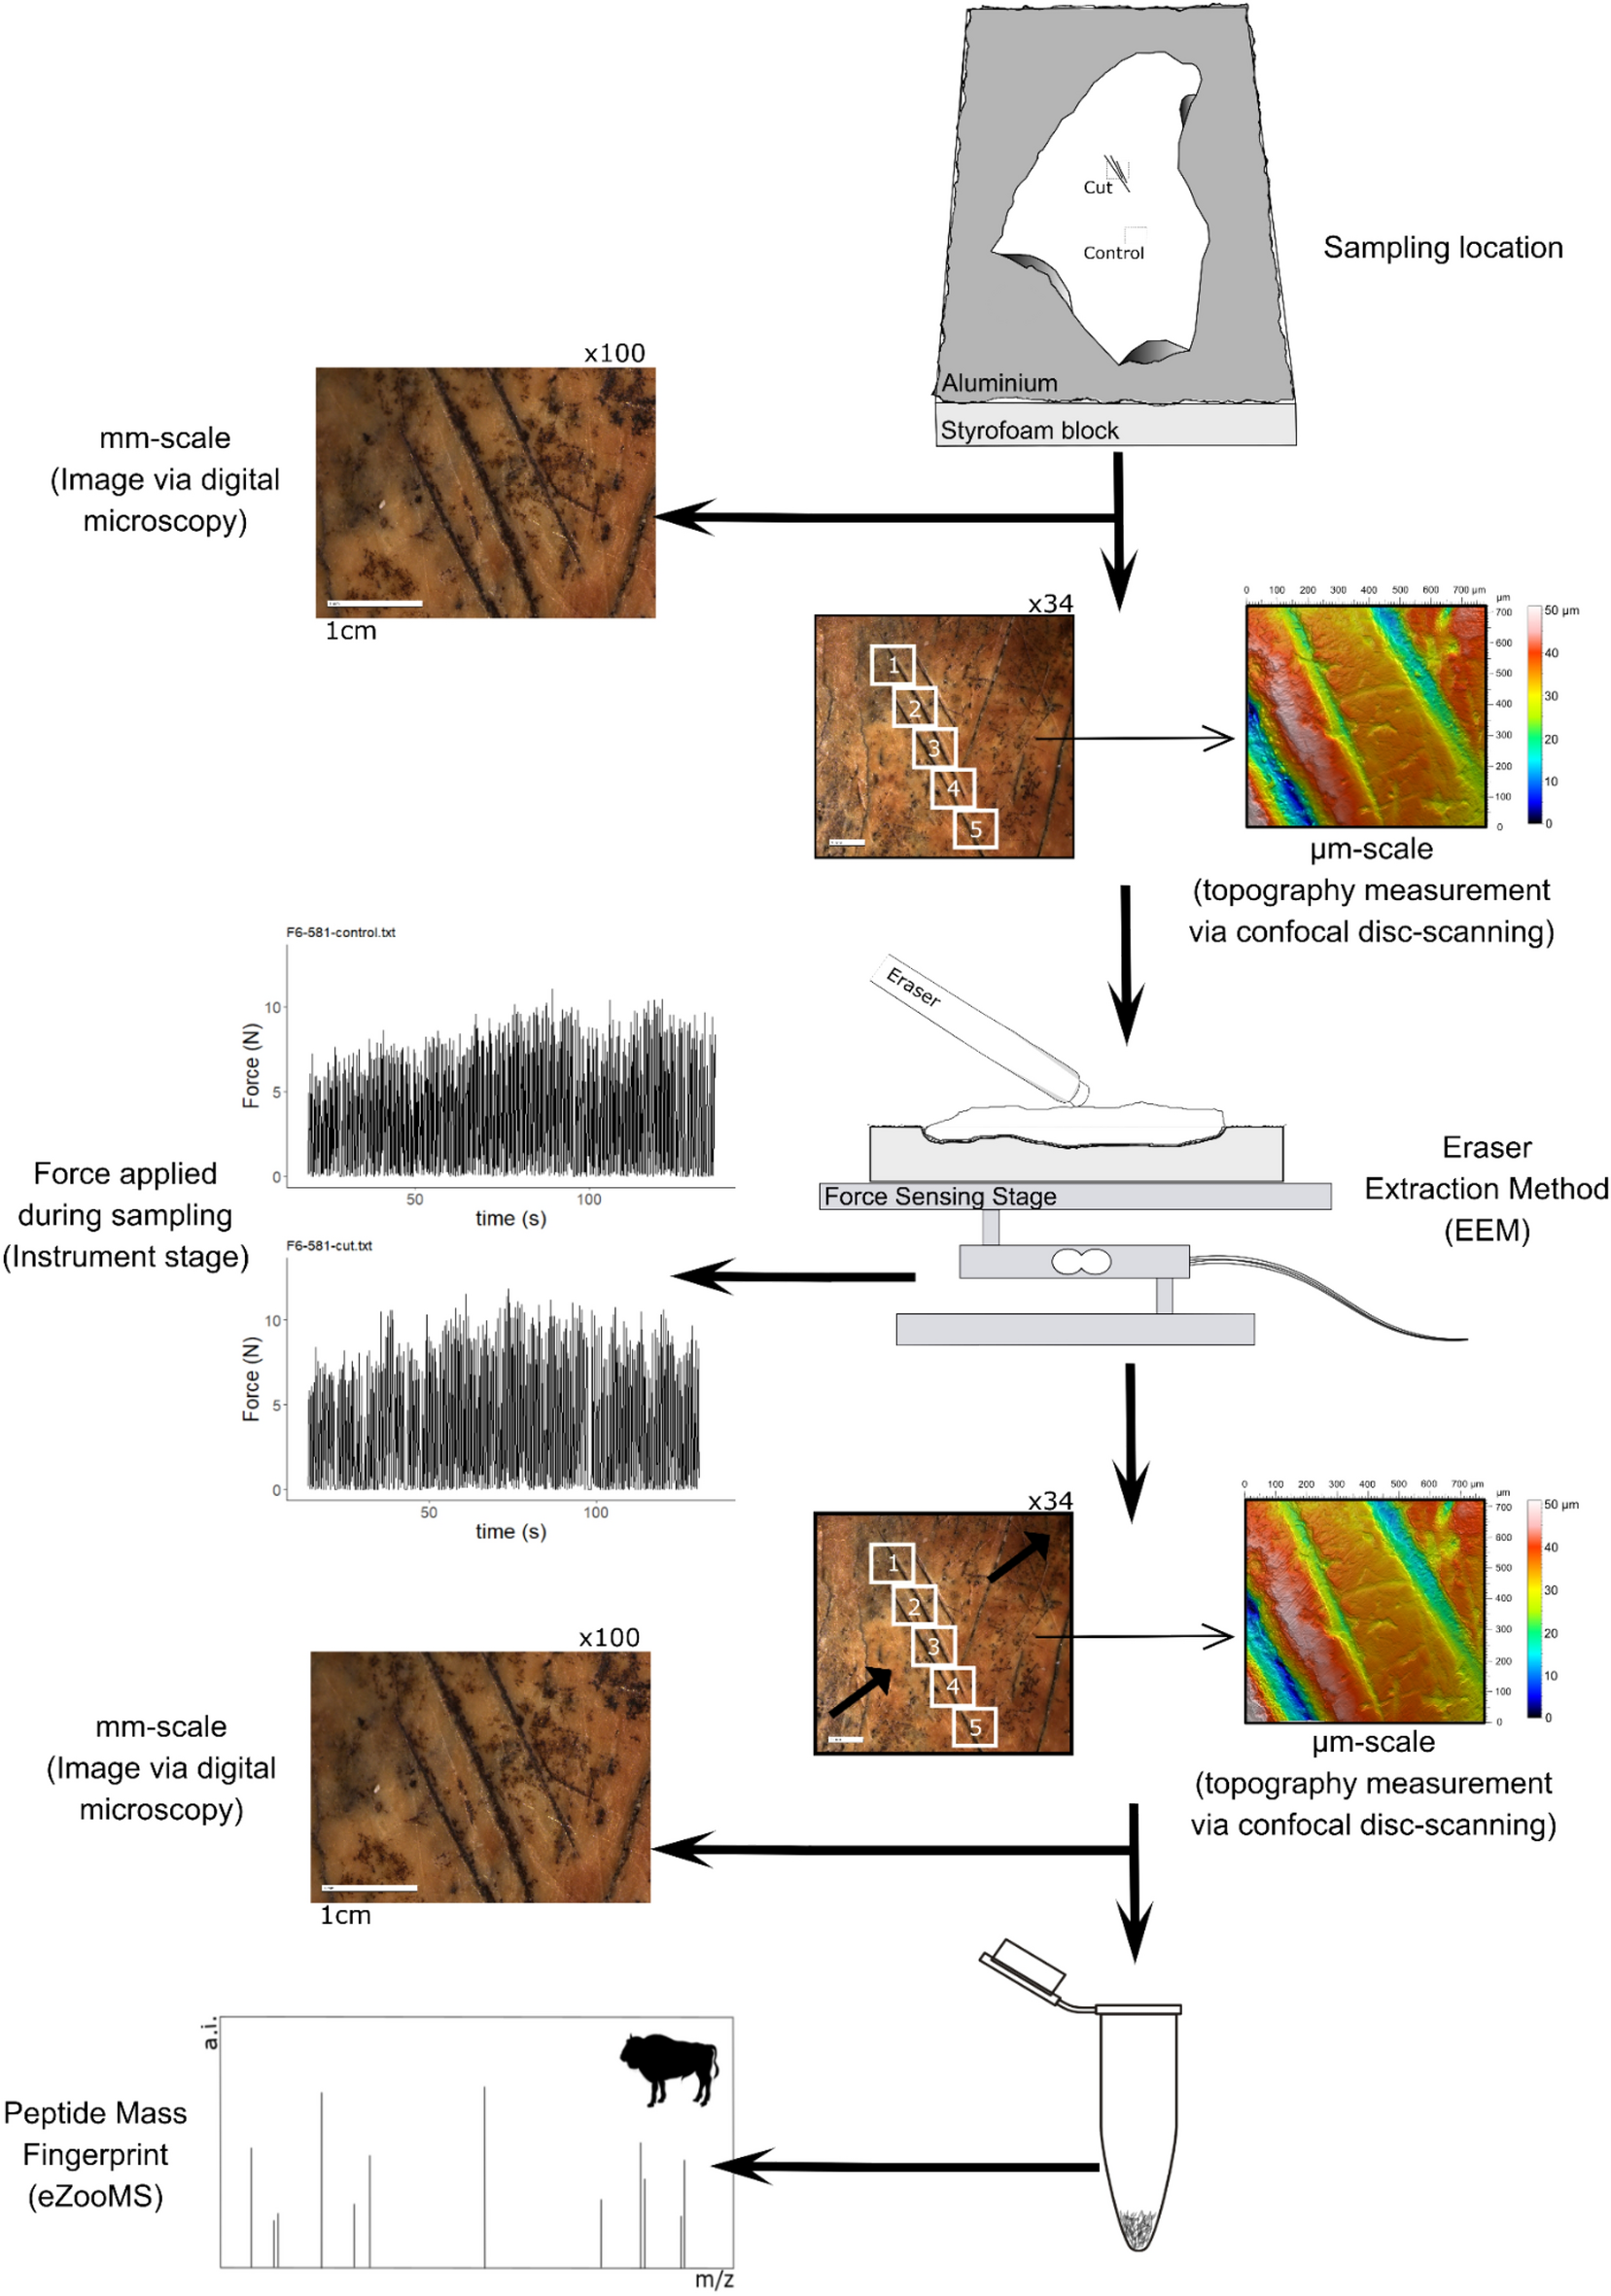 The effect of eraser sampling for proteomic analysis on Palaeolithic bone  surface microtopography